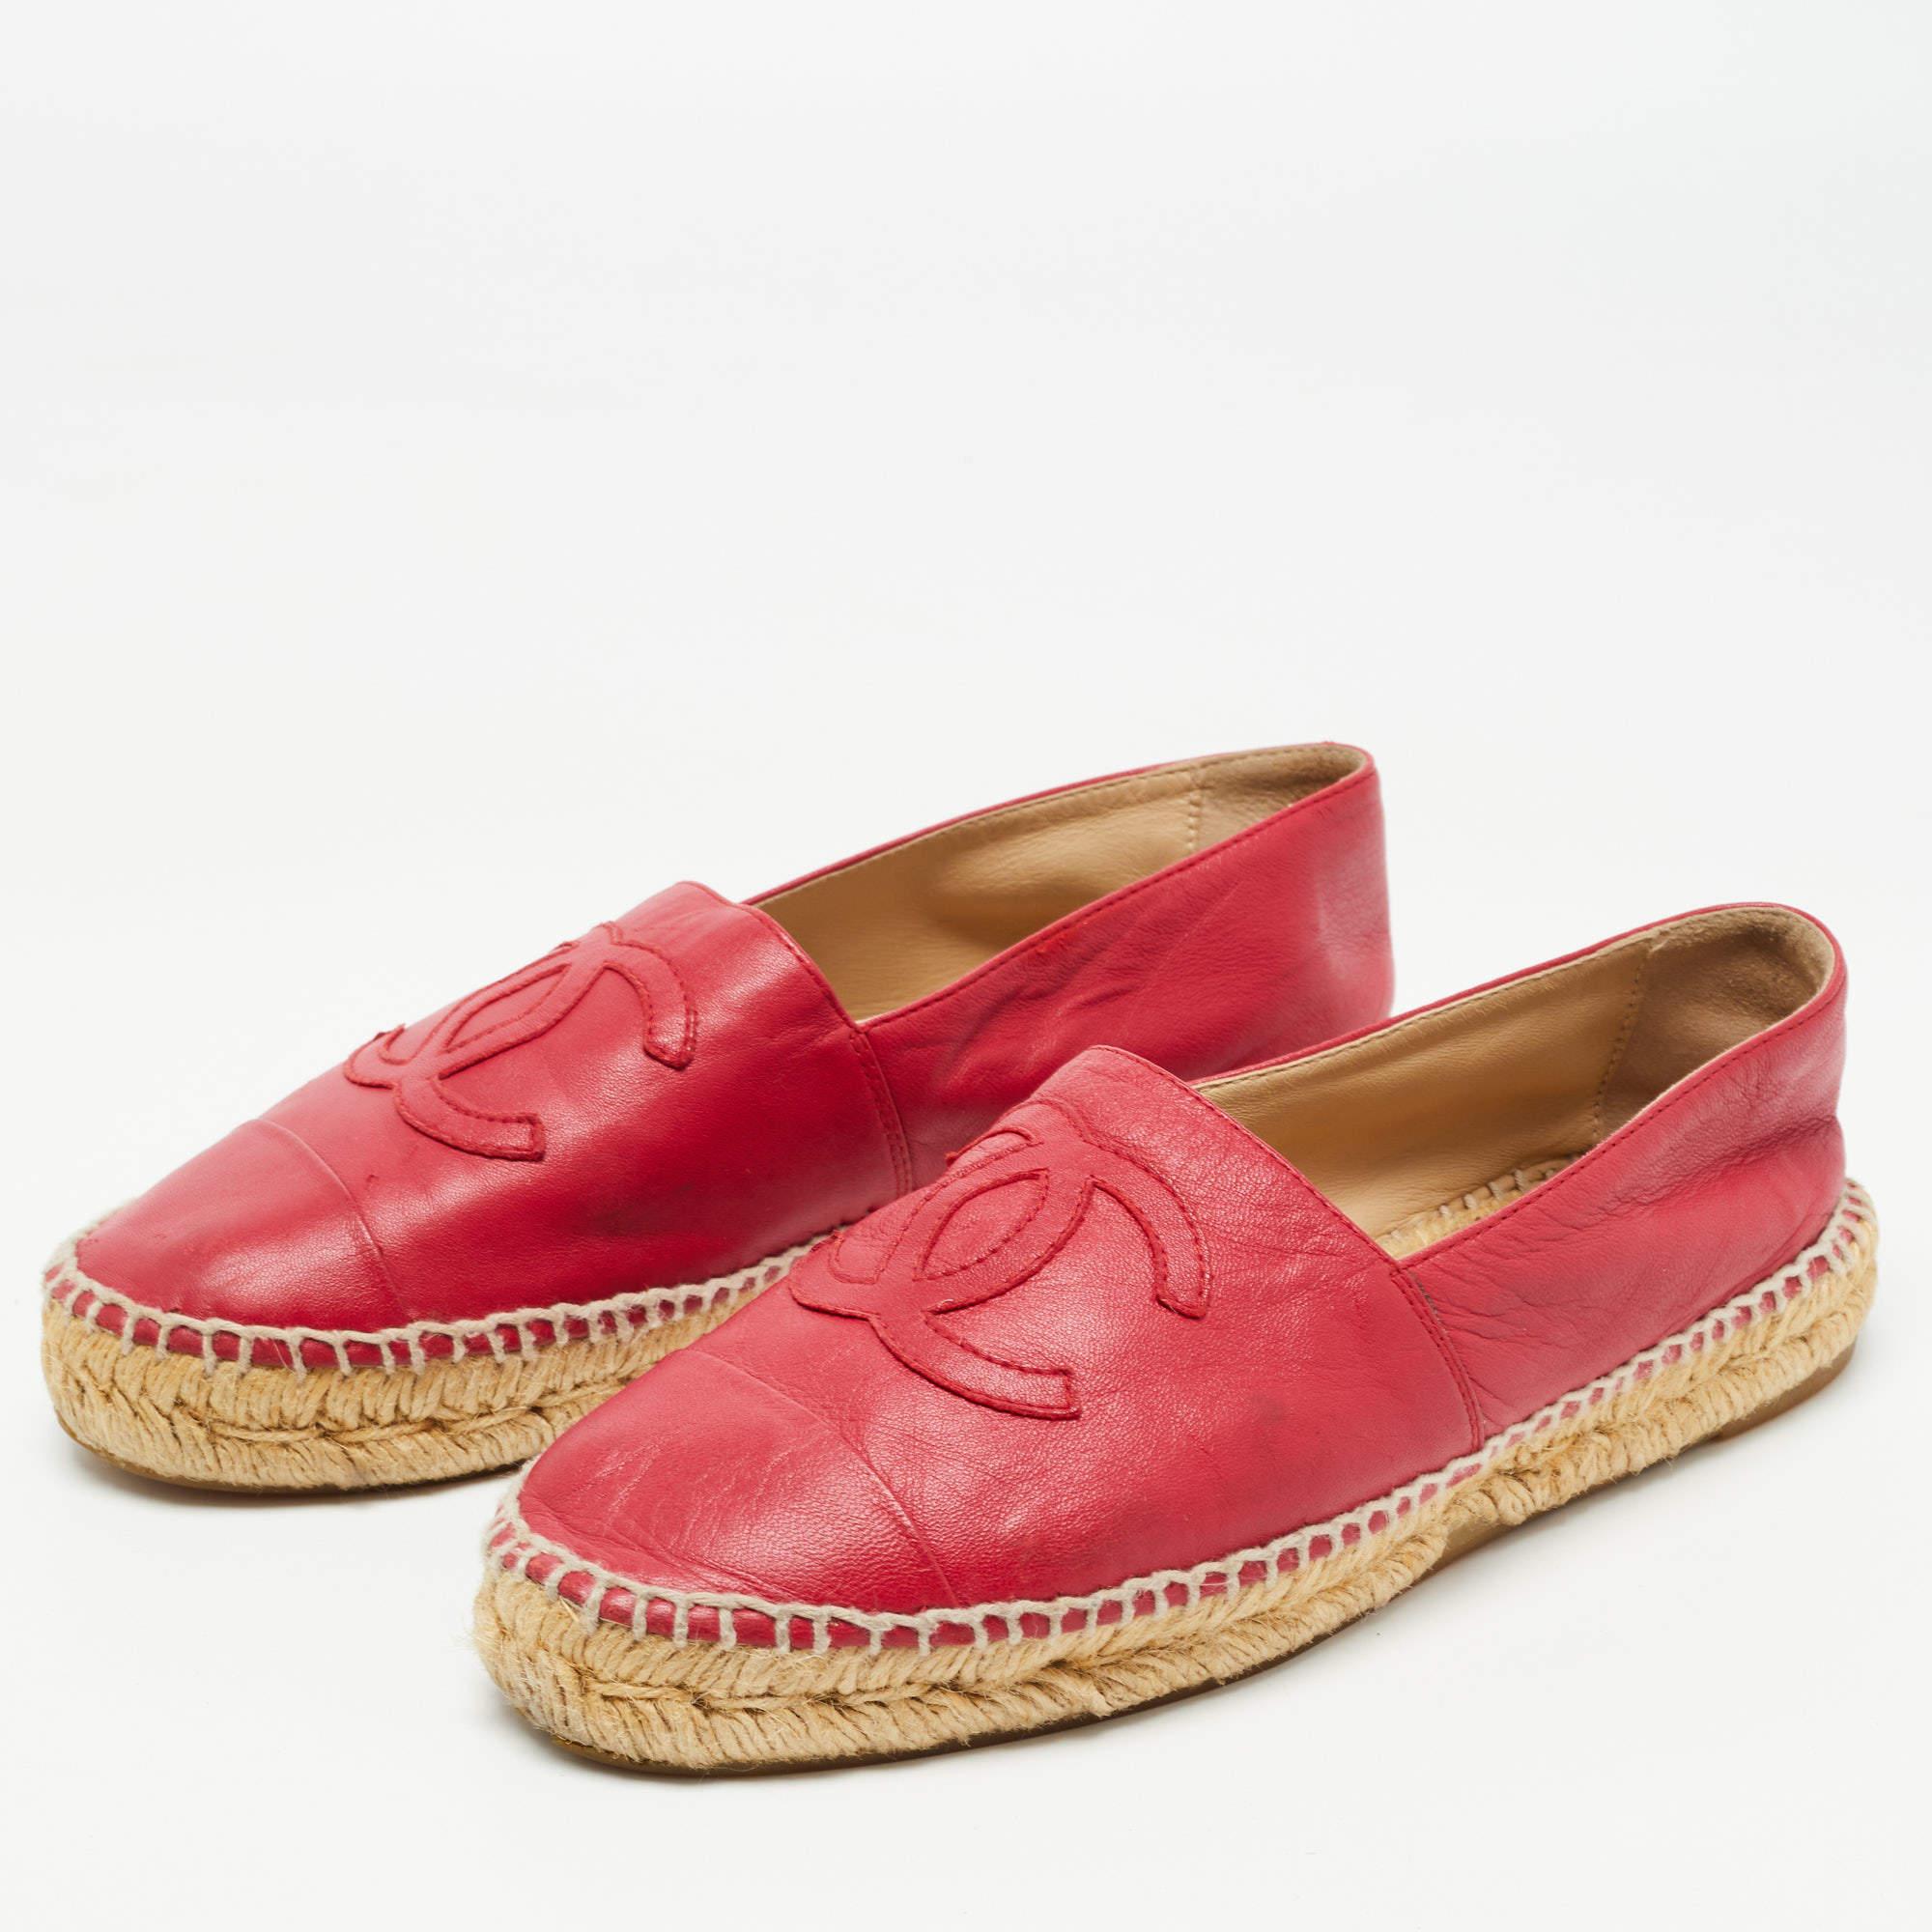 Chanel Pink Leather CC Espadrille Flats Size 38 4